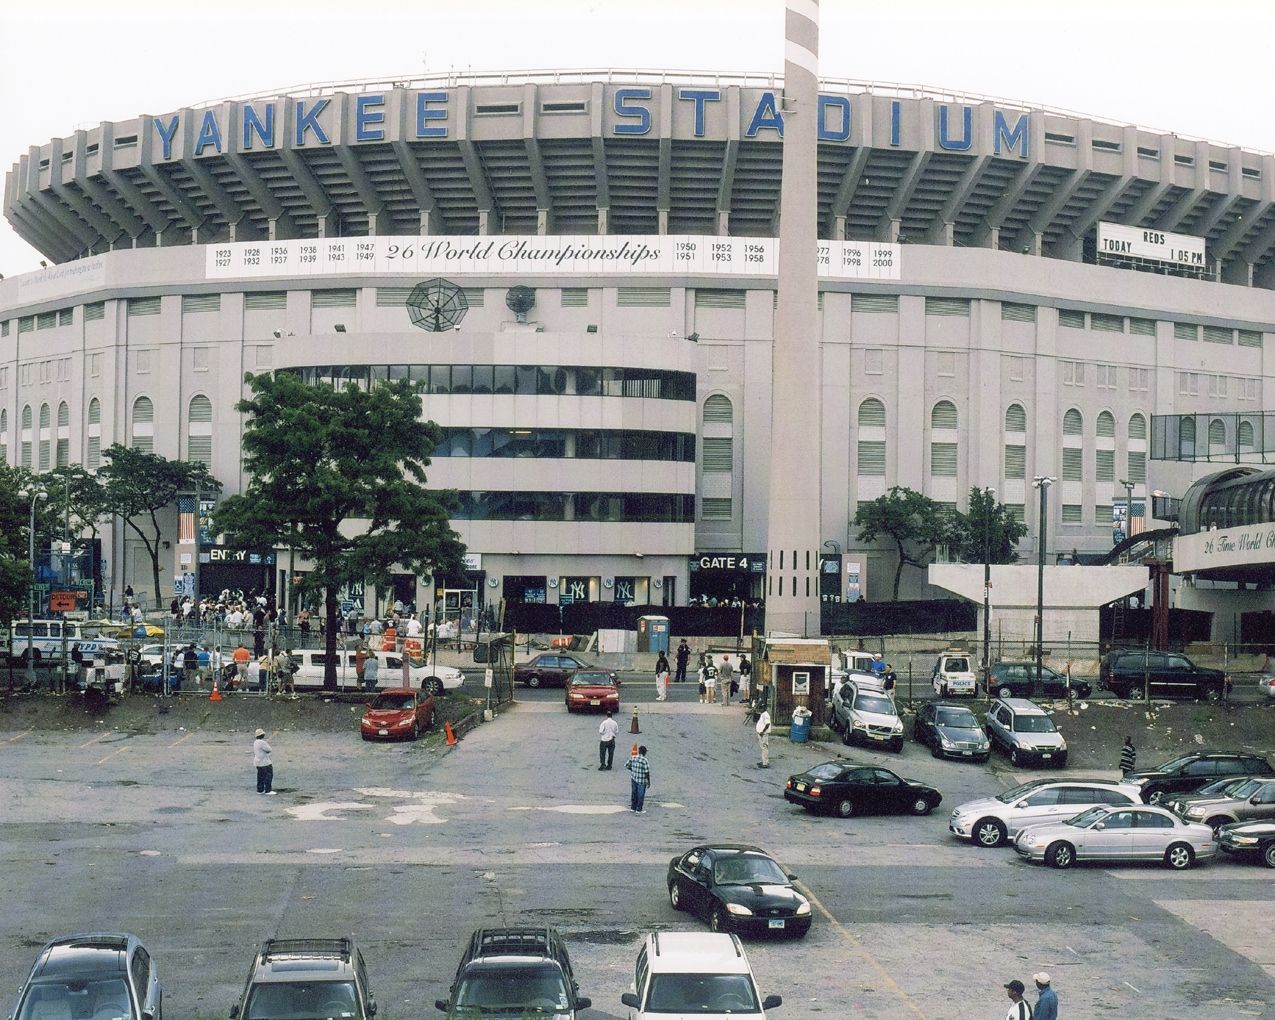 Free download Mlb American League Background of Old Yankee Stadium